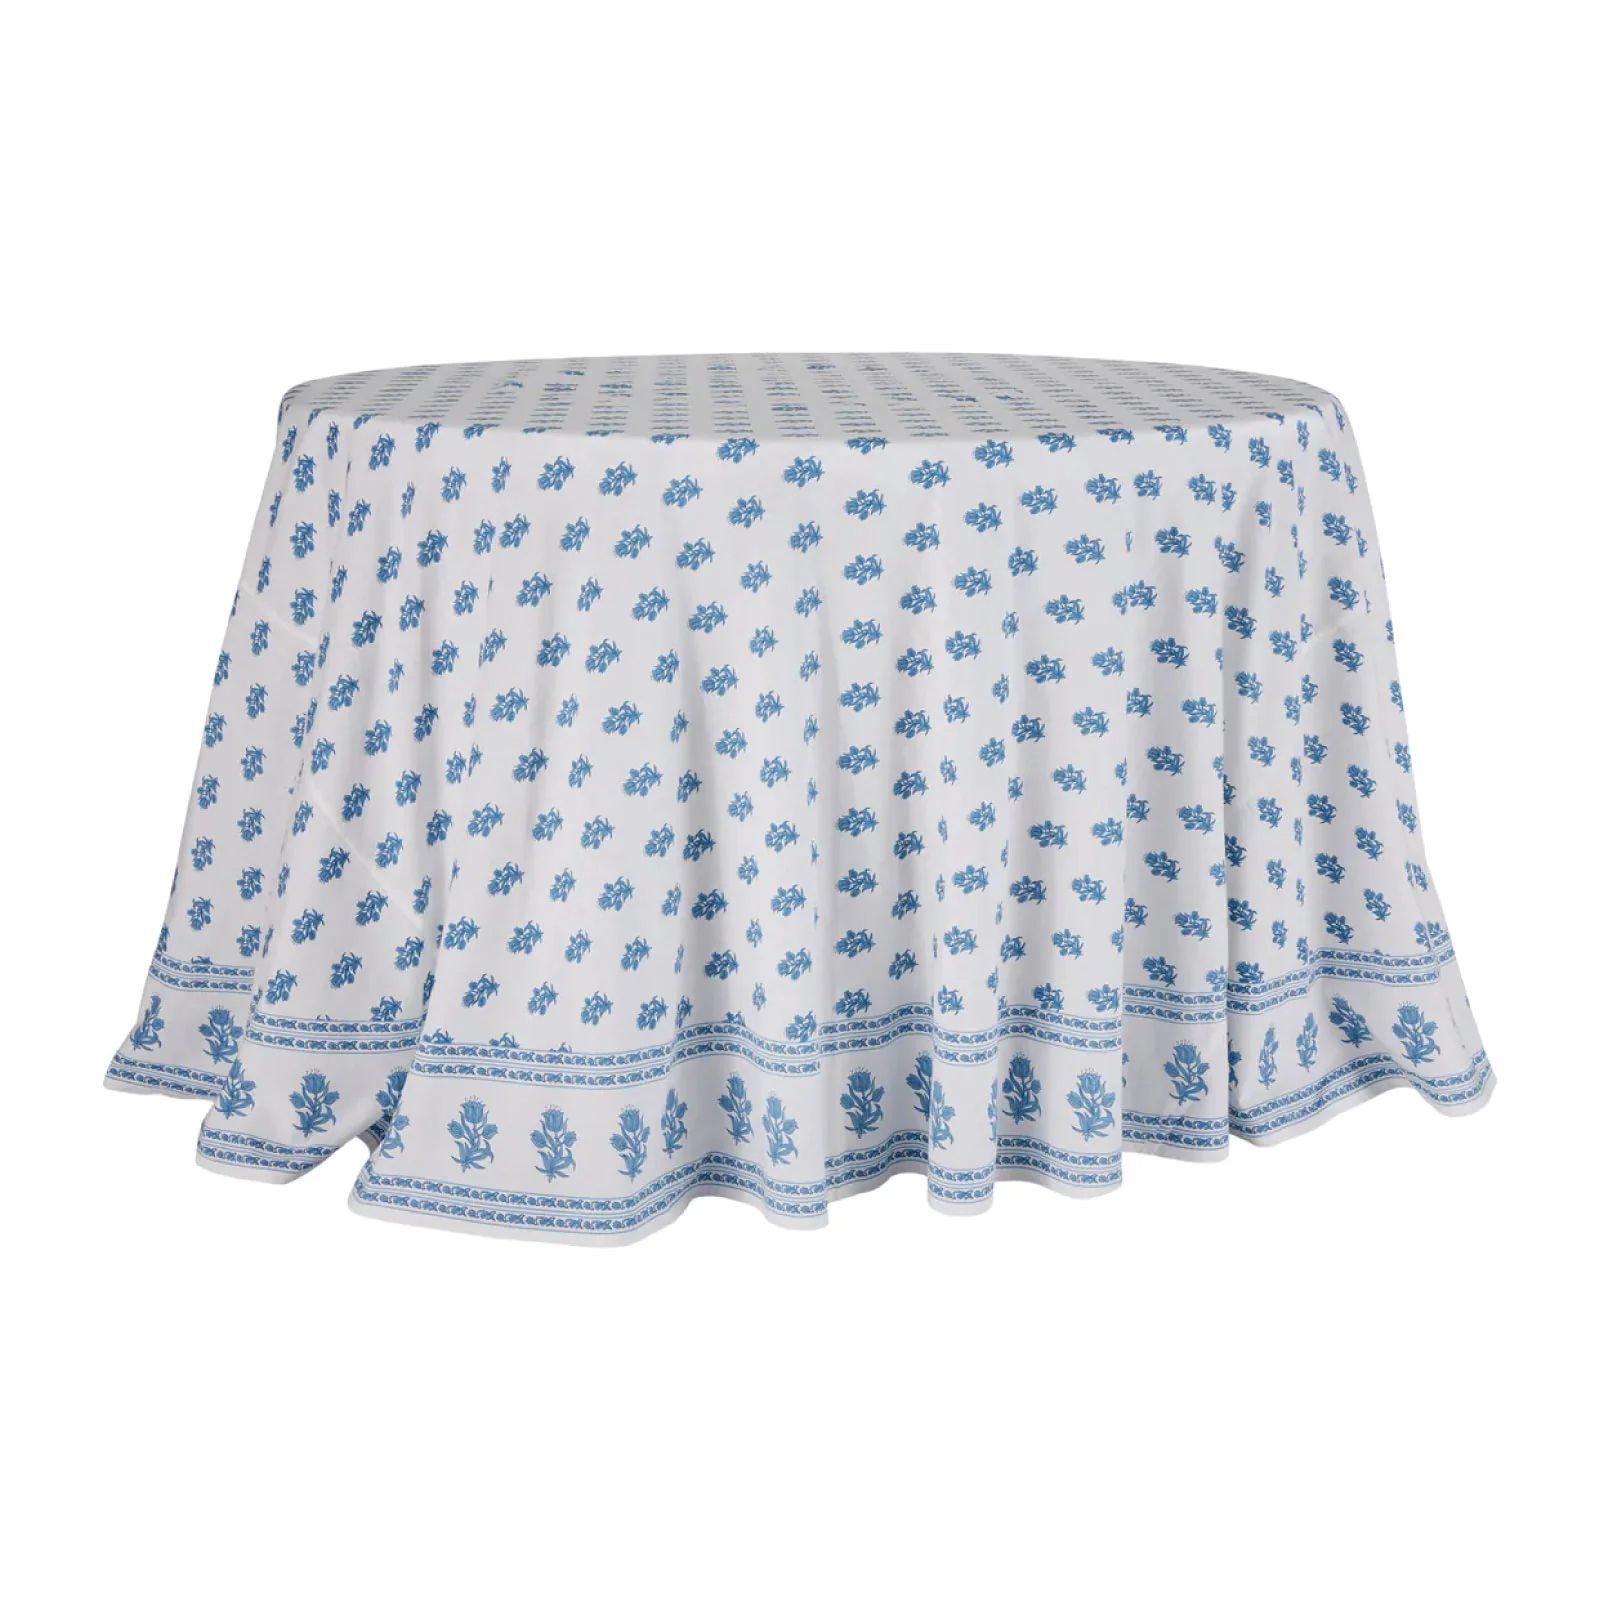 Juliette Round Tablecloth | Brooke and Lou